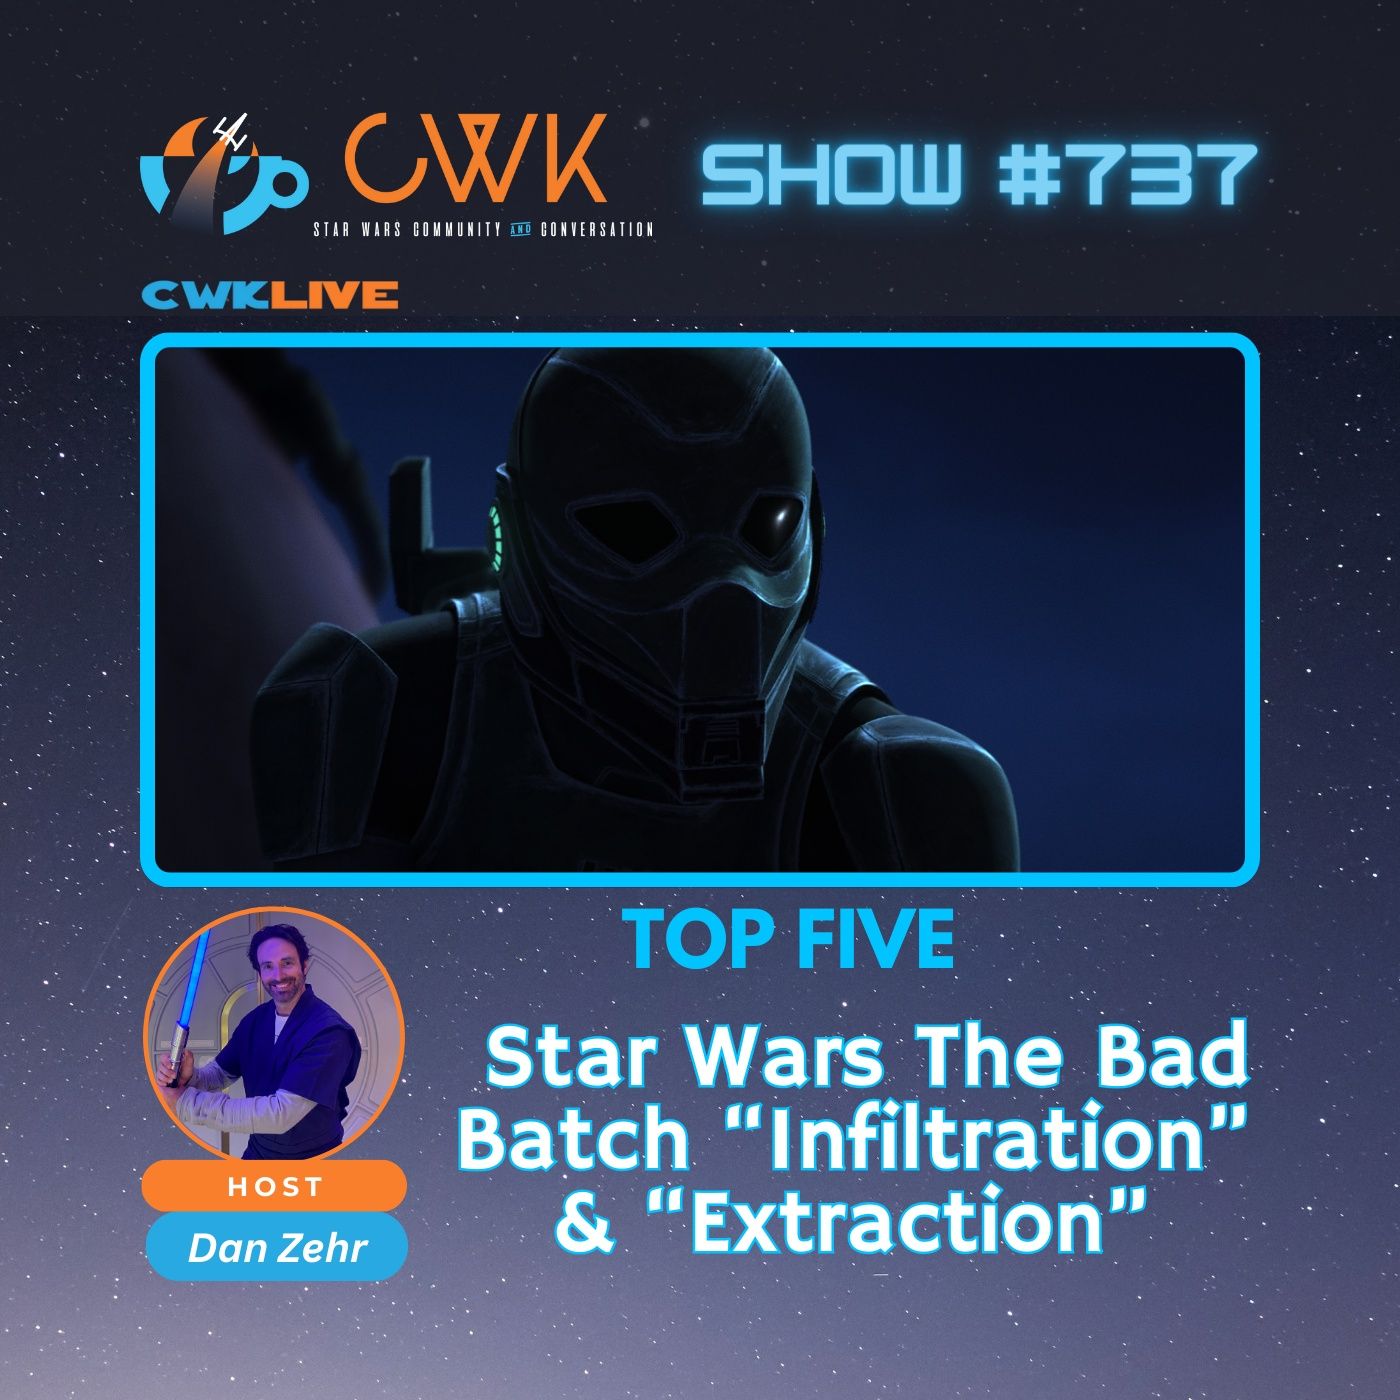 CWK Show #737 LIVE: Top Five Moments from The Bad Batch ”Infiltration” & ”Extraction”